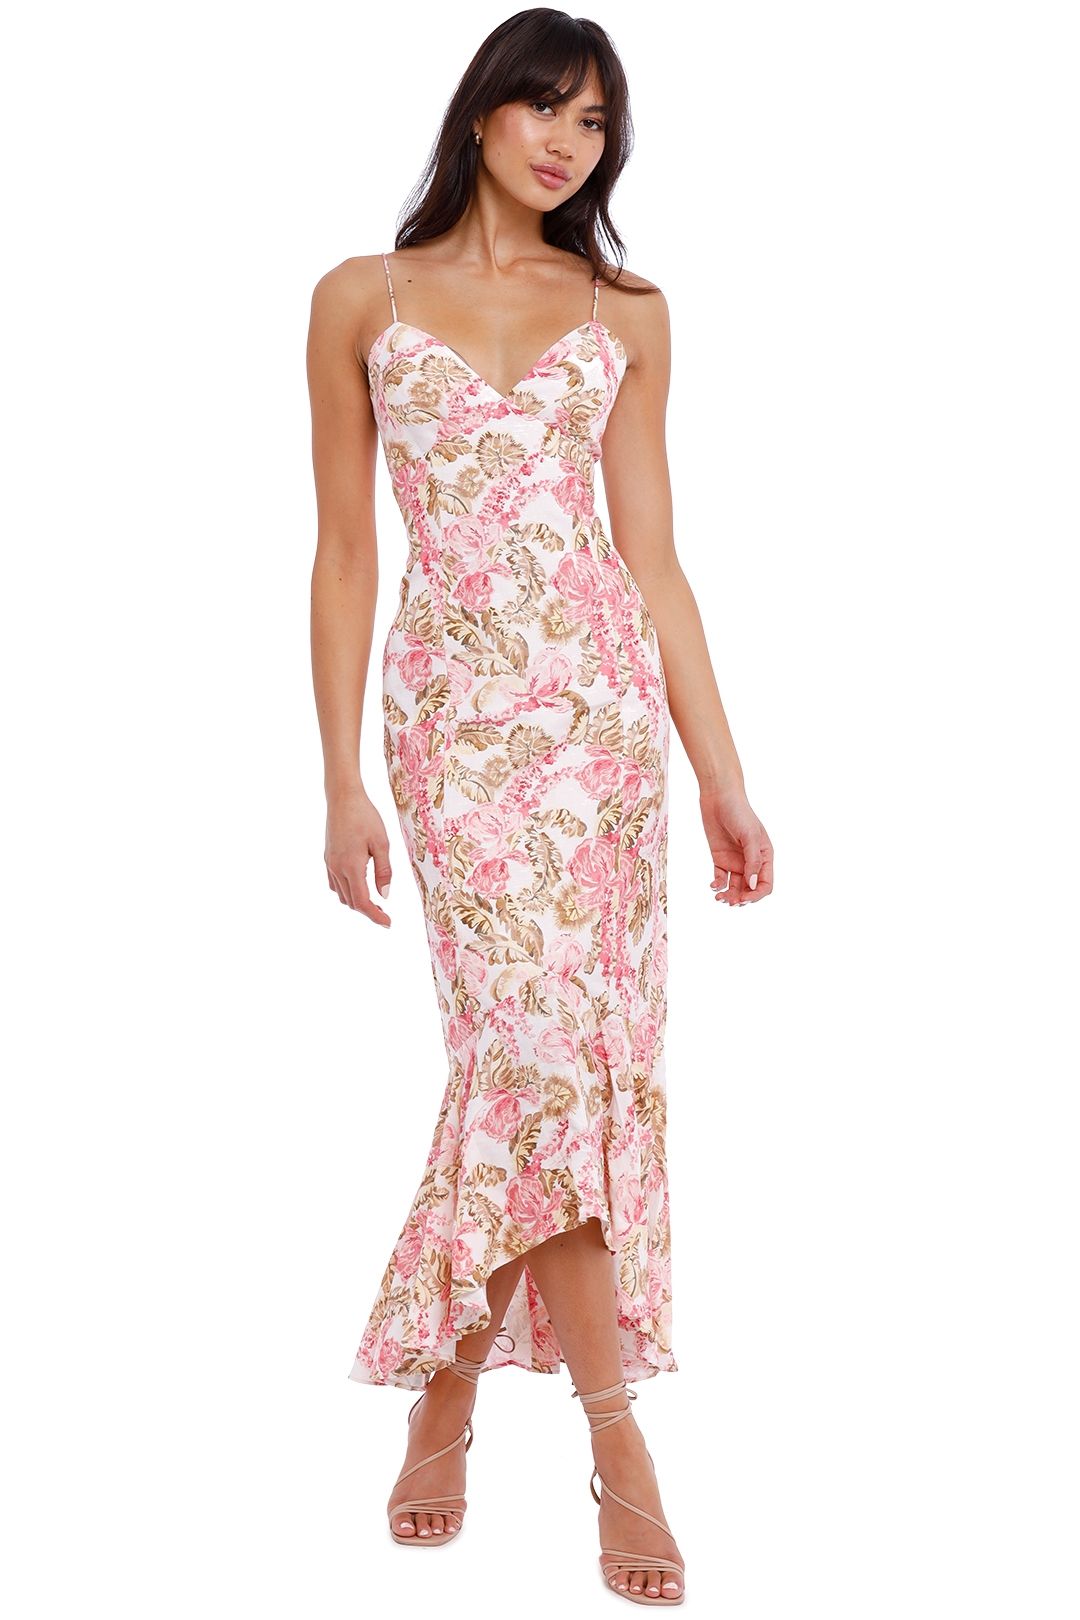 Significant Other Sangria Dress Floral pink